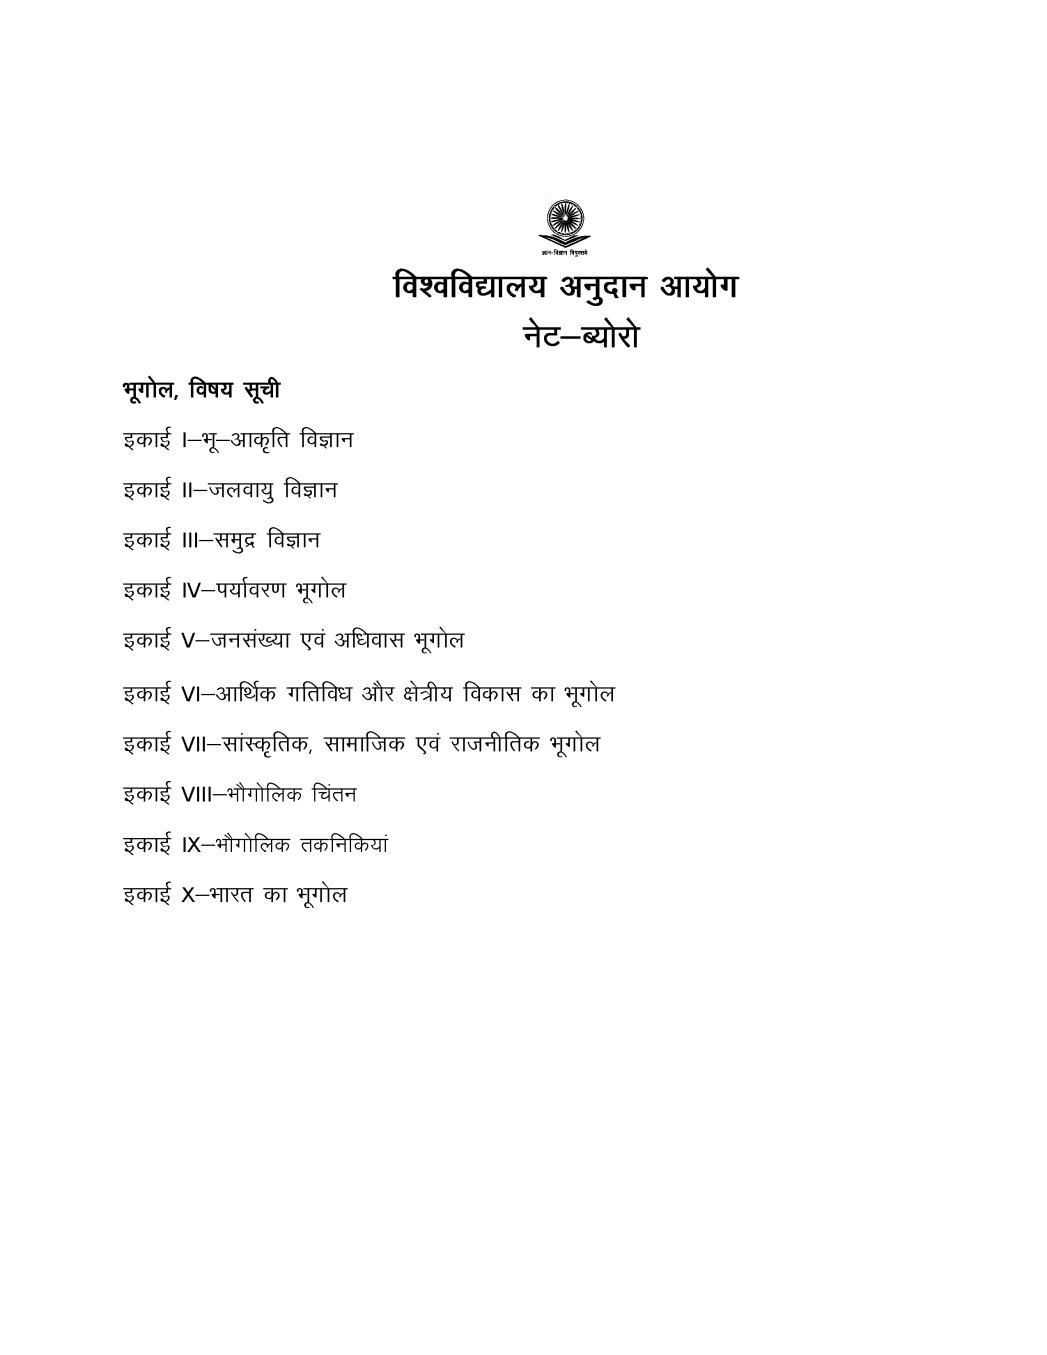 UGC NET Syllabus for Geography 2020 in Hindi - Page 1